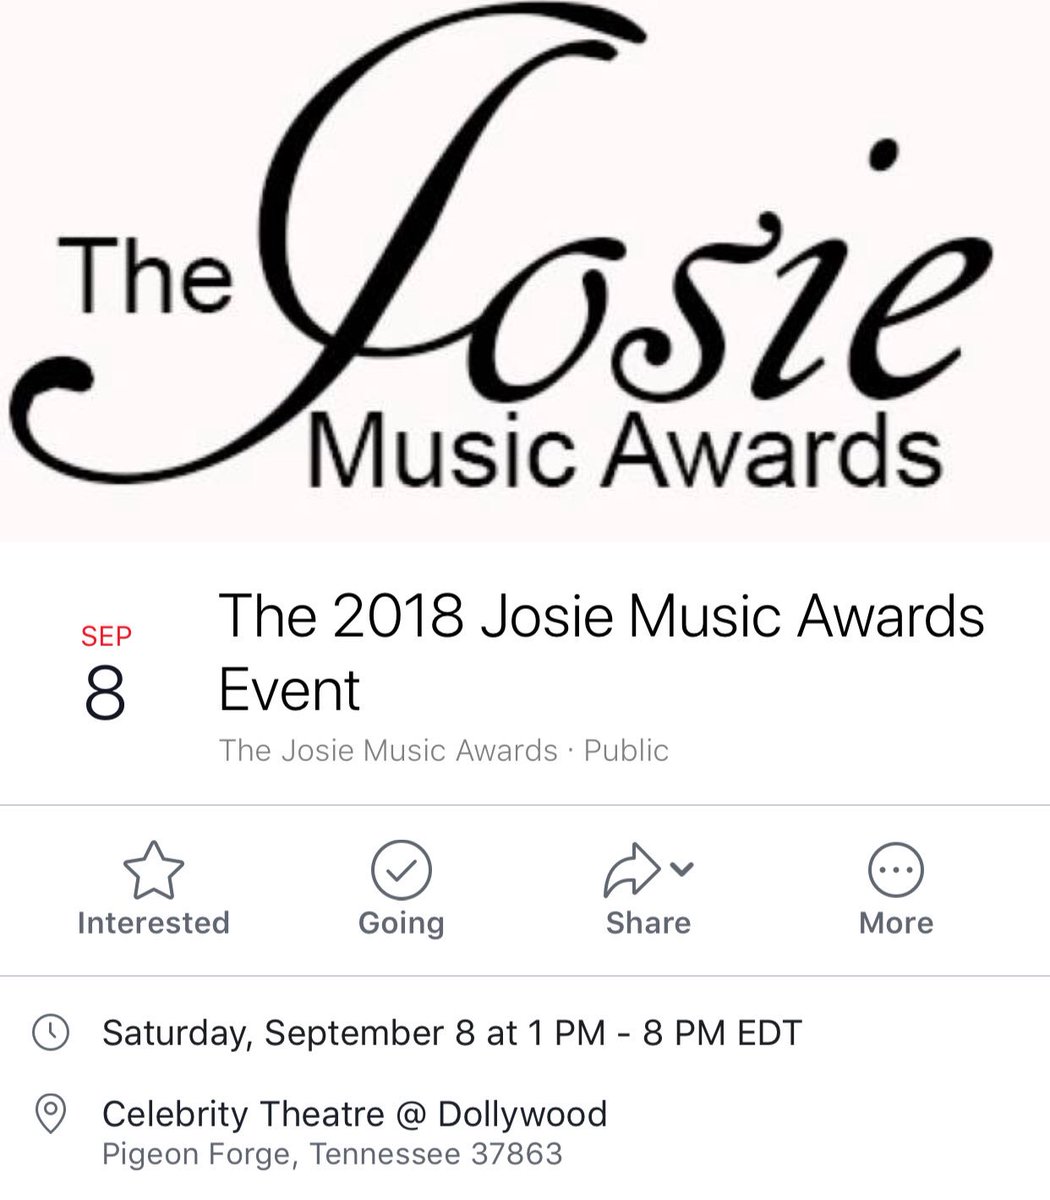 I’m so excited to announce that I have been nominated for Female Rising Star for this years @josiemusicaward There were 13,000 submissions! I feel so blessed! Thank you all for the support! #RisingStar #countrymusic #Awards #nomination #thankyou #supportindieartist